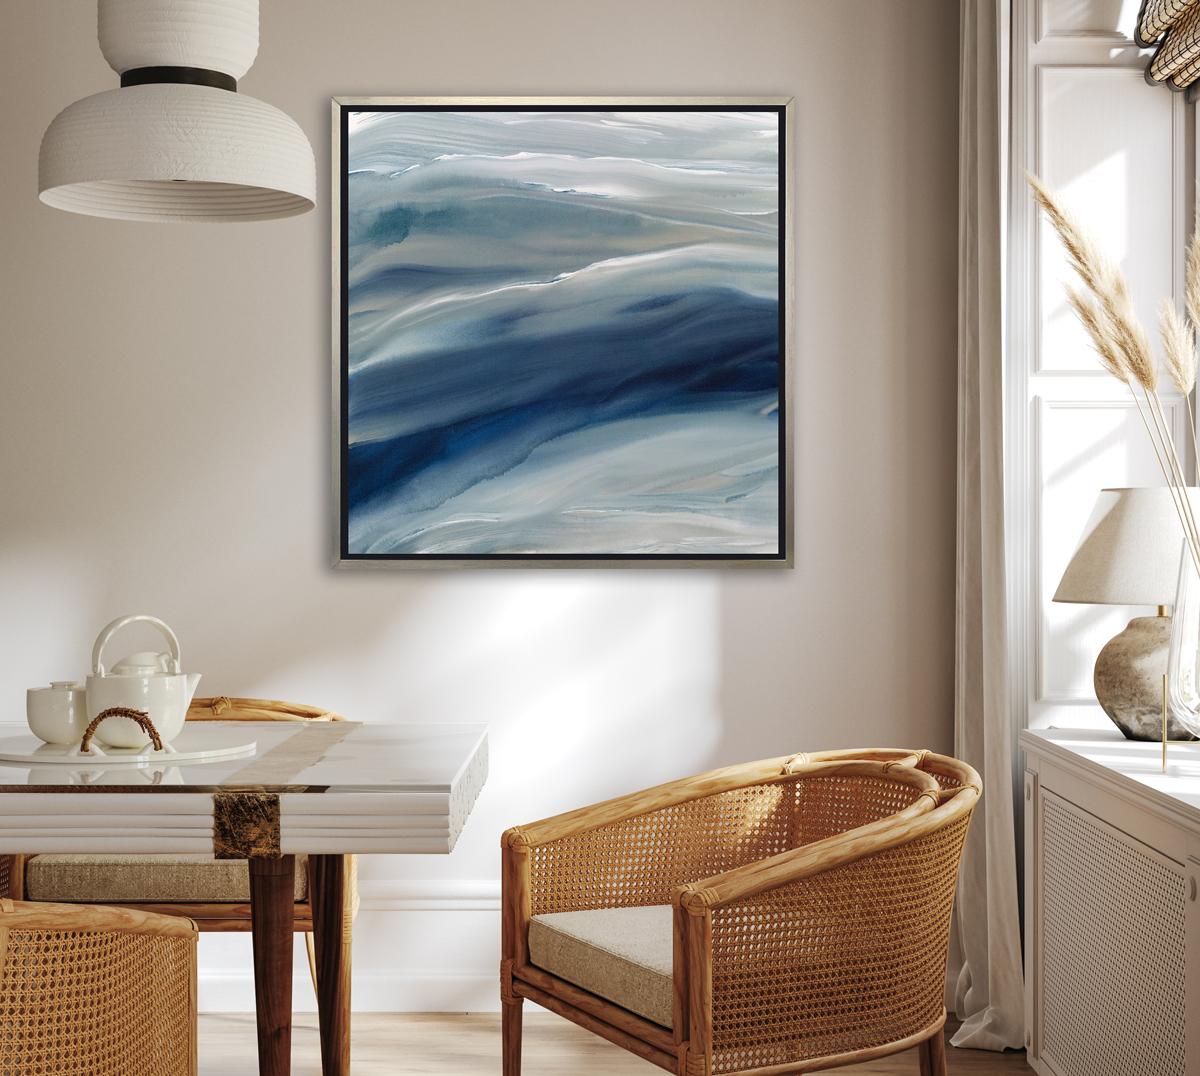 This contemporary limited edition print by Teodora Guererra features a cool wash of blue and white with an abstracted coastal aesthetic. This print pairs beautifully with Indigo Tide II - a limited edition print by the same artist. To purchase two